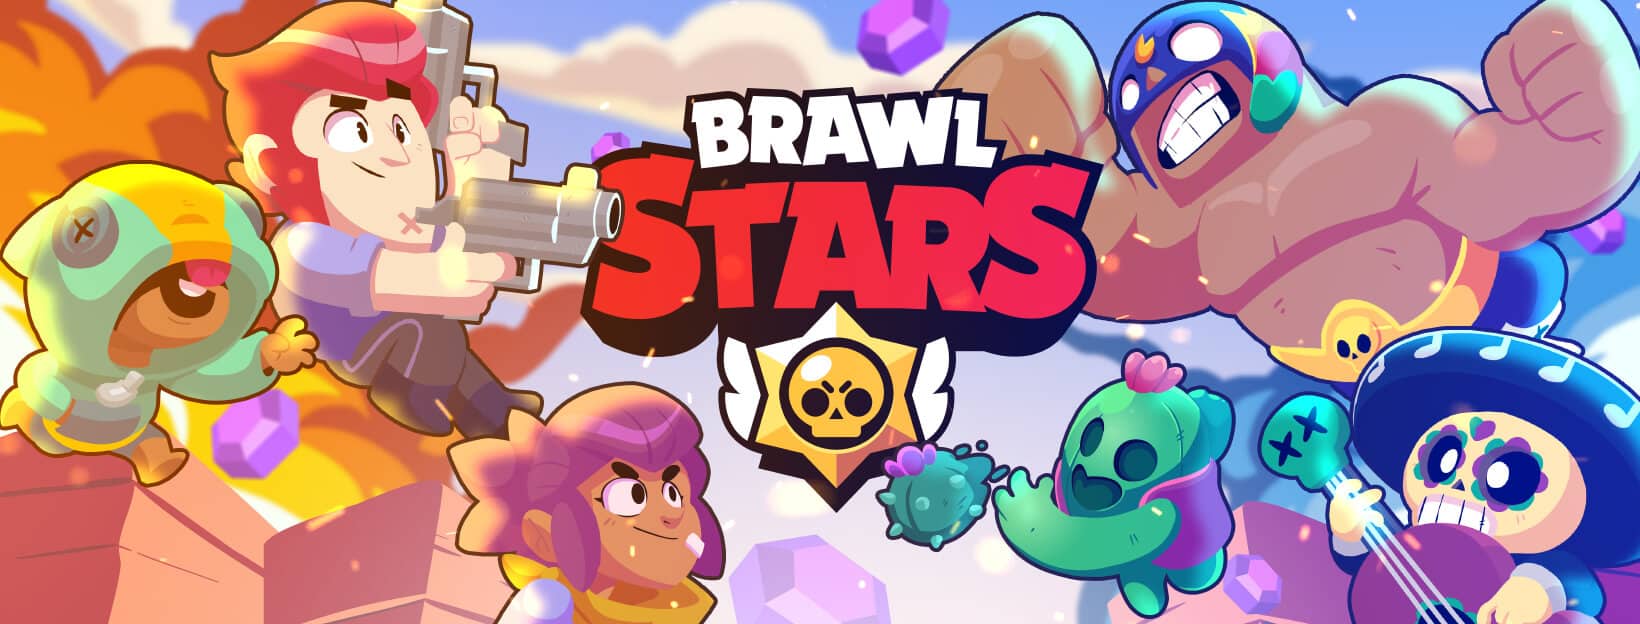 Parent S Guide Is Brawl Stars Safe For Your Kids - how to make a screen brawl stars